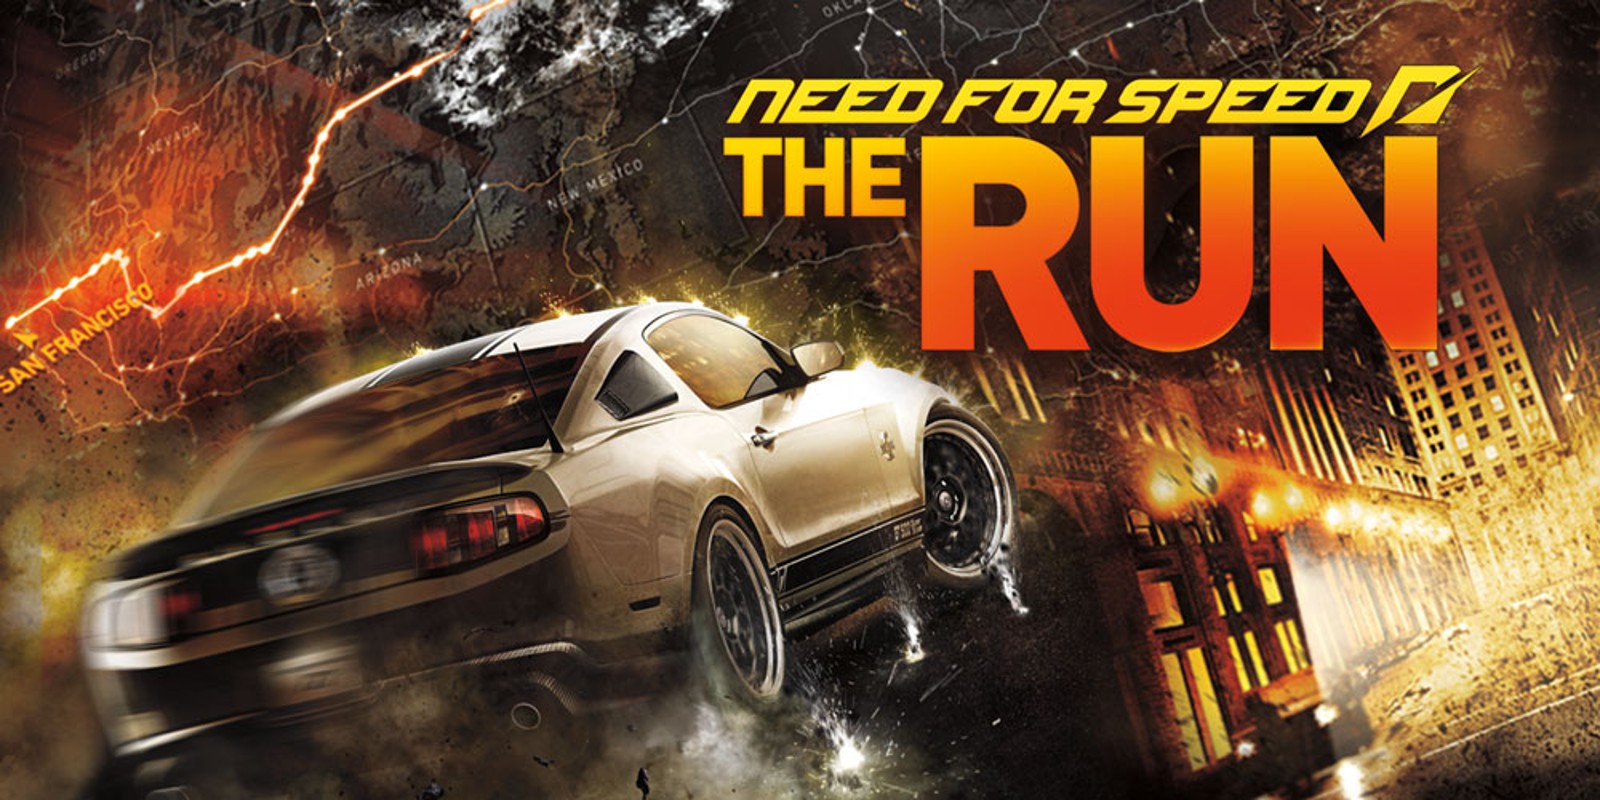 Need For Speed: The Run free full pc game for Download